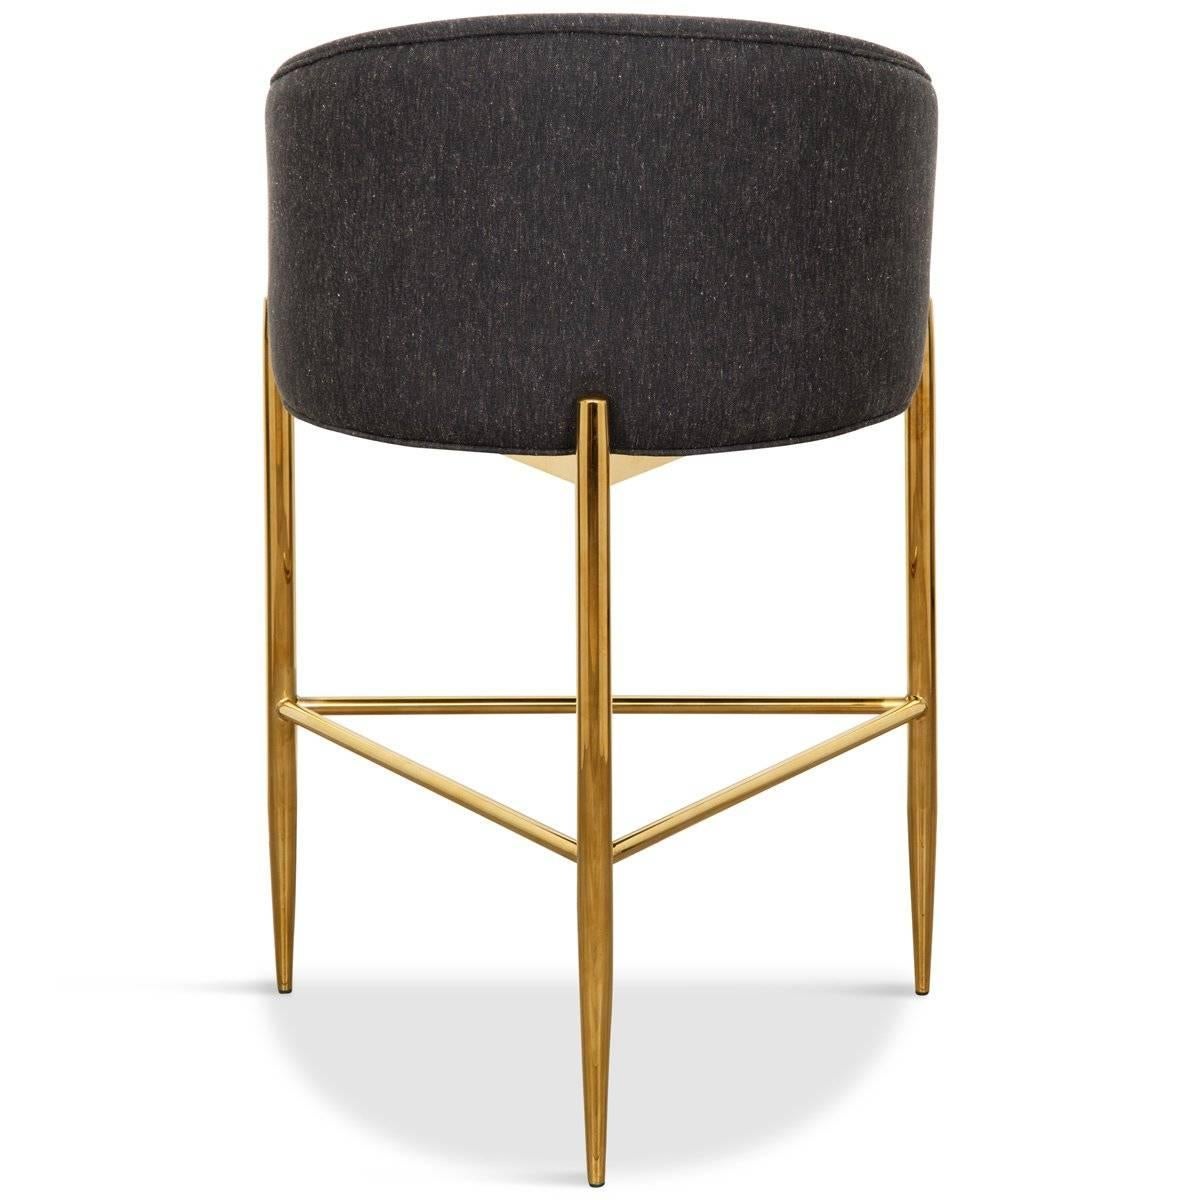 Similar in design to our Art Deco dining chair, this barstool is perfect for the counter. Sitting atop of a brass base with three long brass legs and featuring a curved upholstered back adding comfort and style to your entertaining space. What an